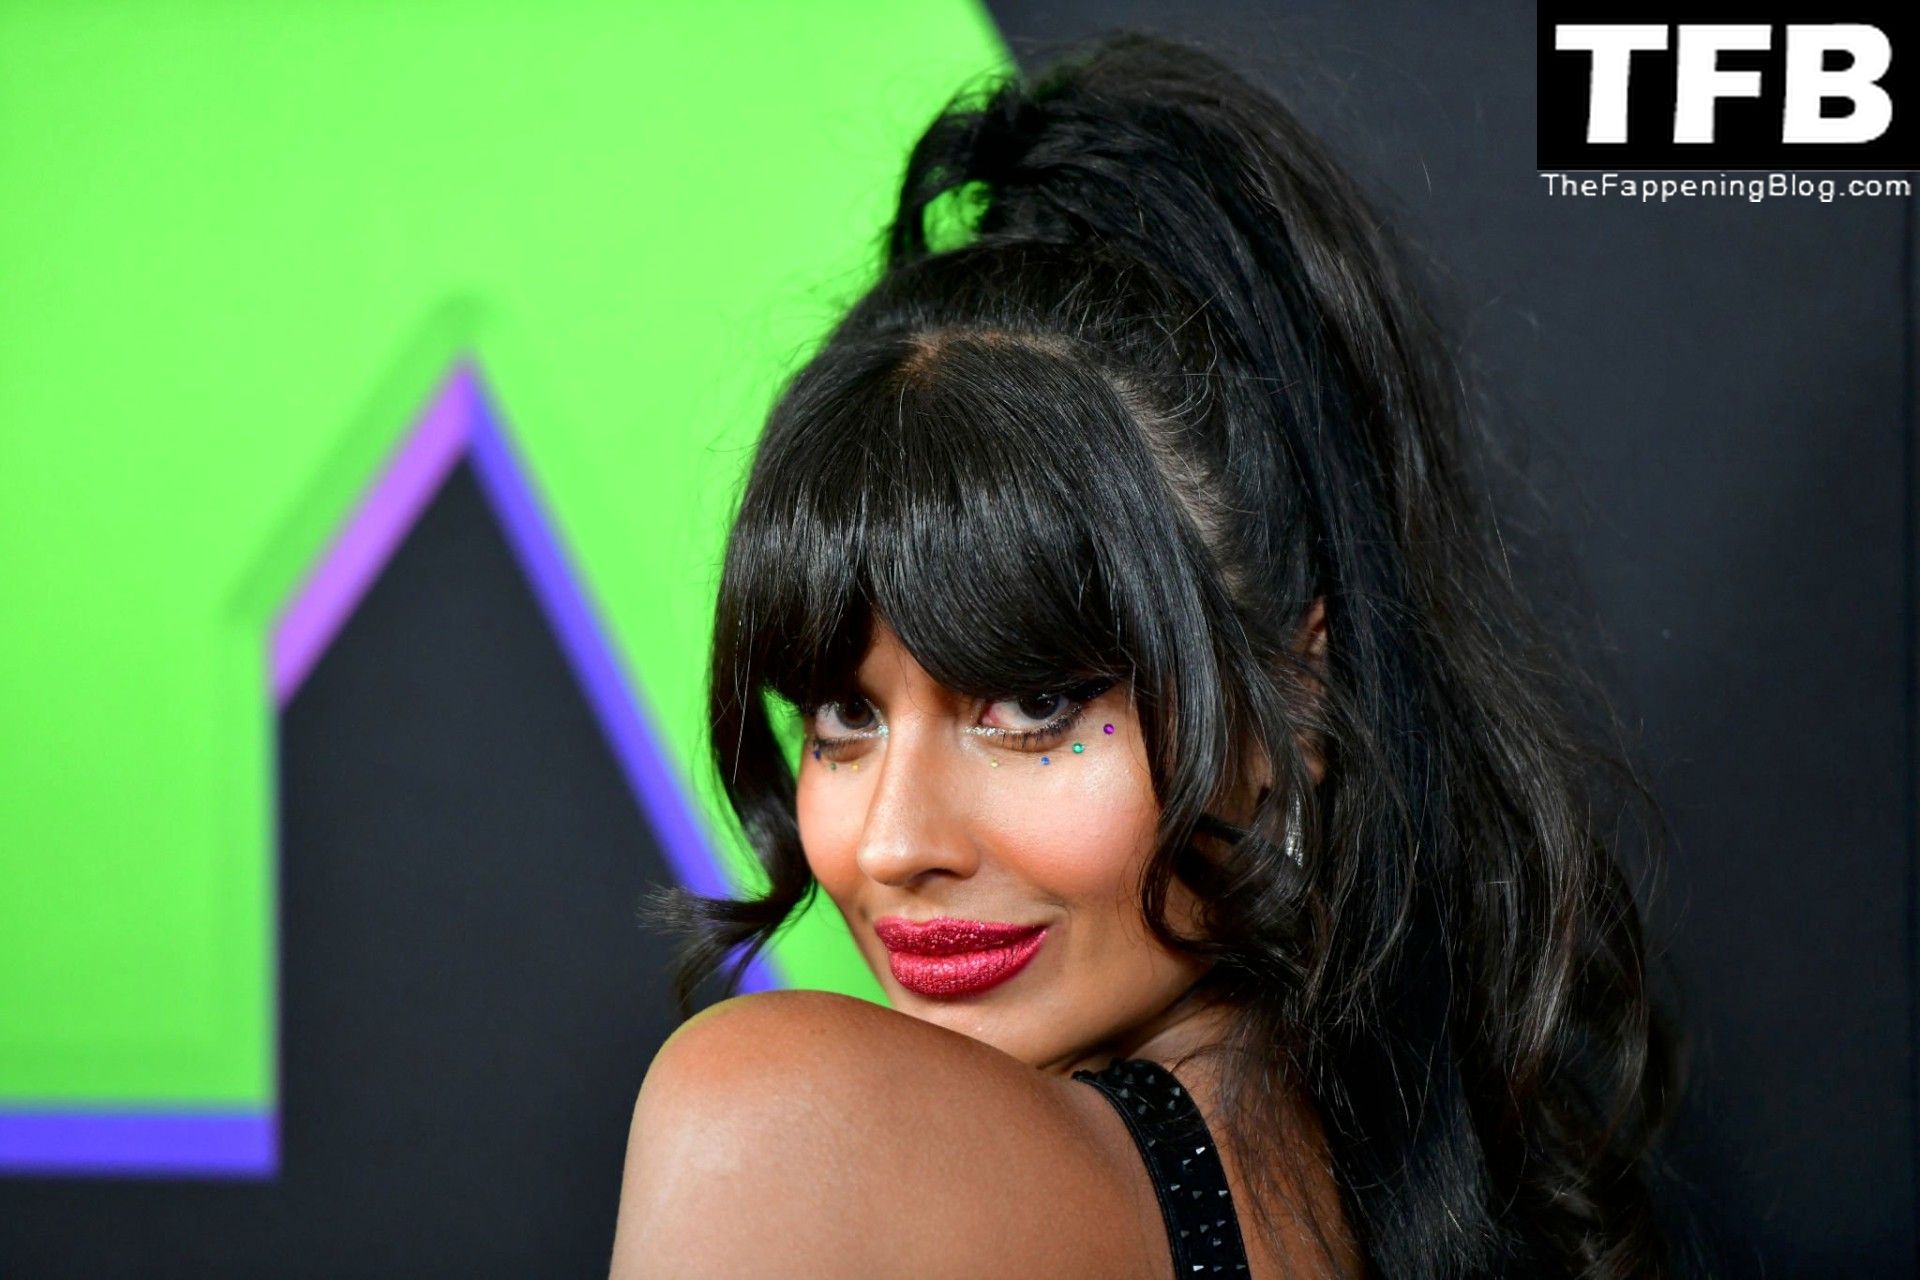 Jameela Jamil Sexy The Fappening Blog 40 - Jameela Jamil Flaunts Her Big Tits at the Premiere of Disney+’s “She Hulk: Attorney at Law” in LA (53 Photos)